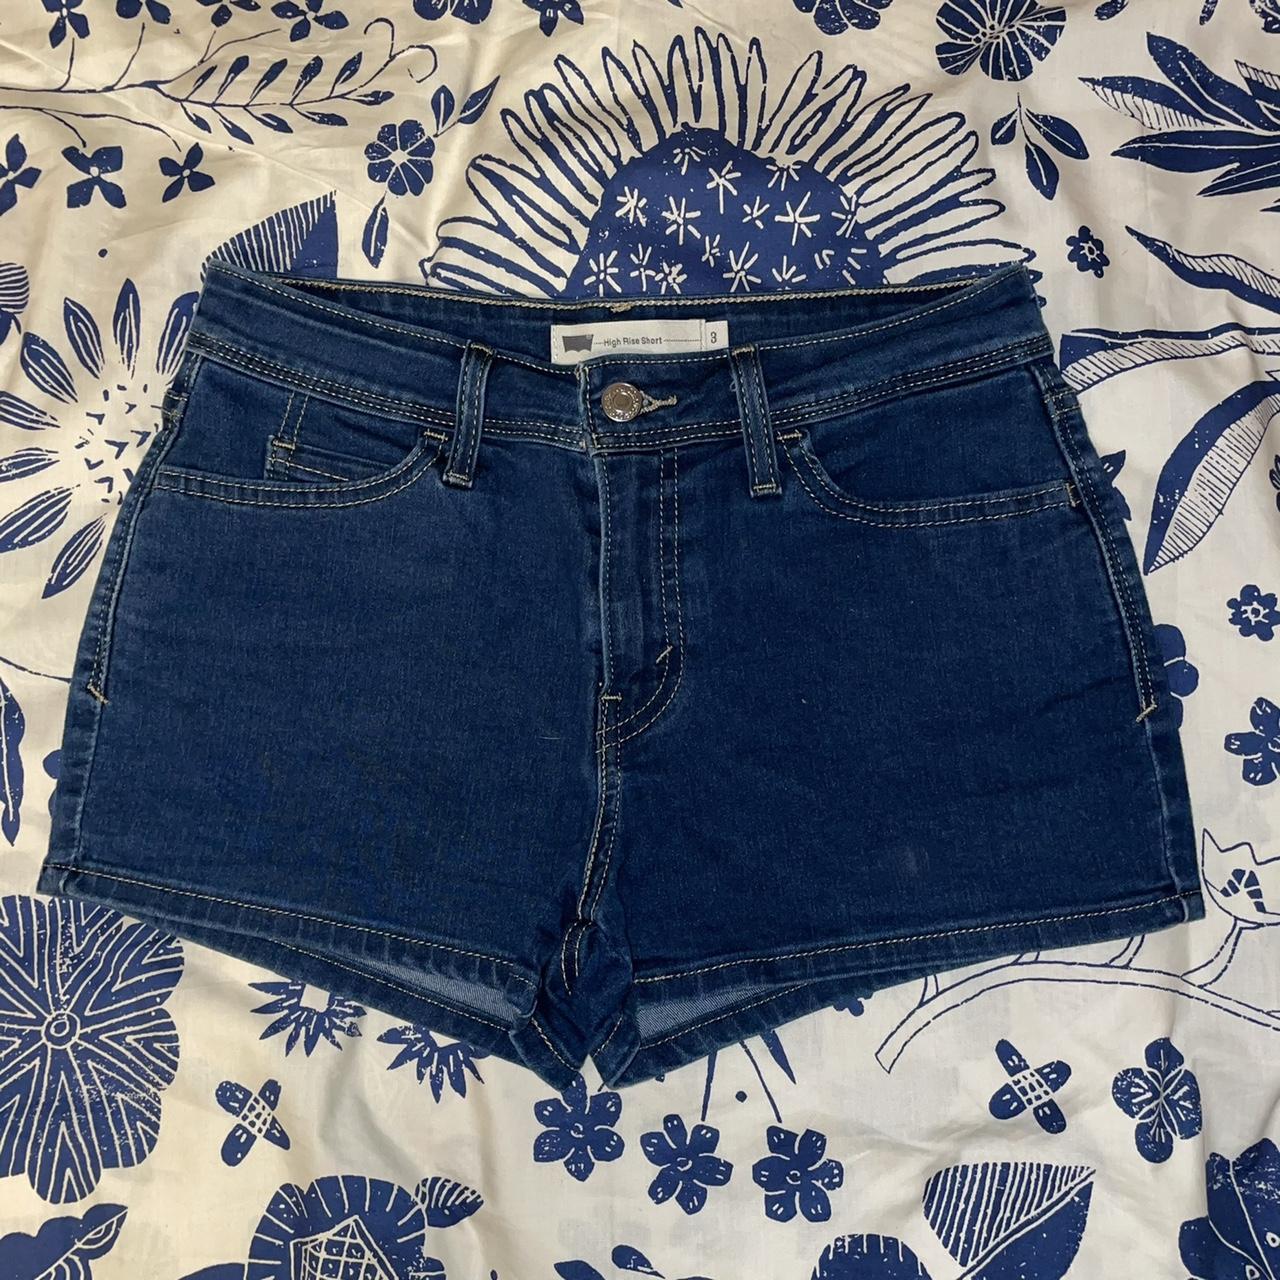 Levi's Women's Navy and Blue Shorts (2)